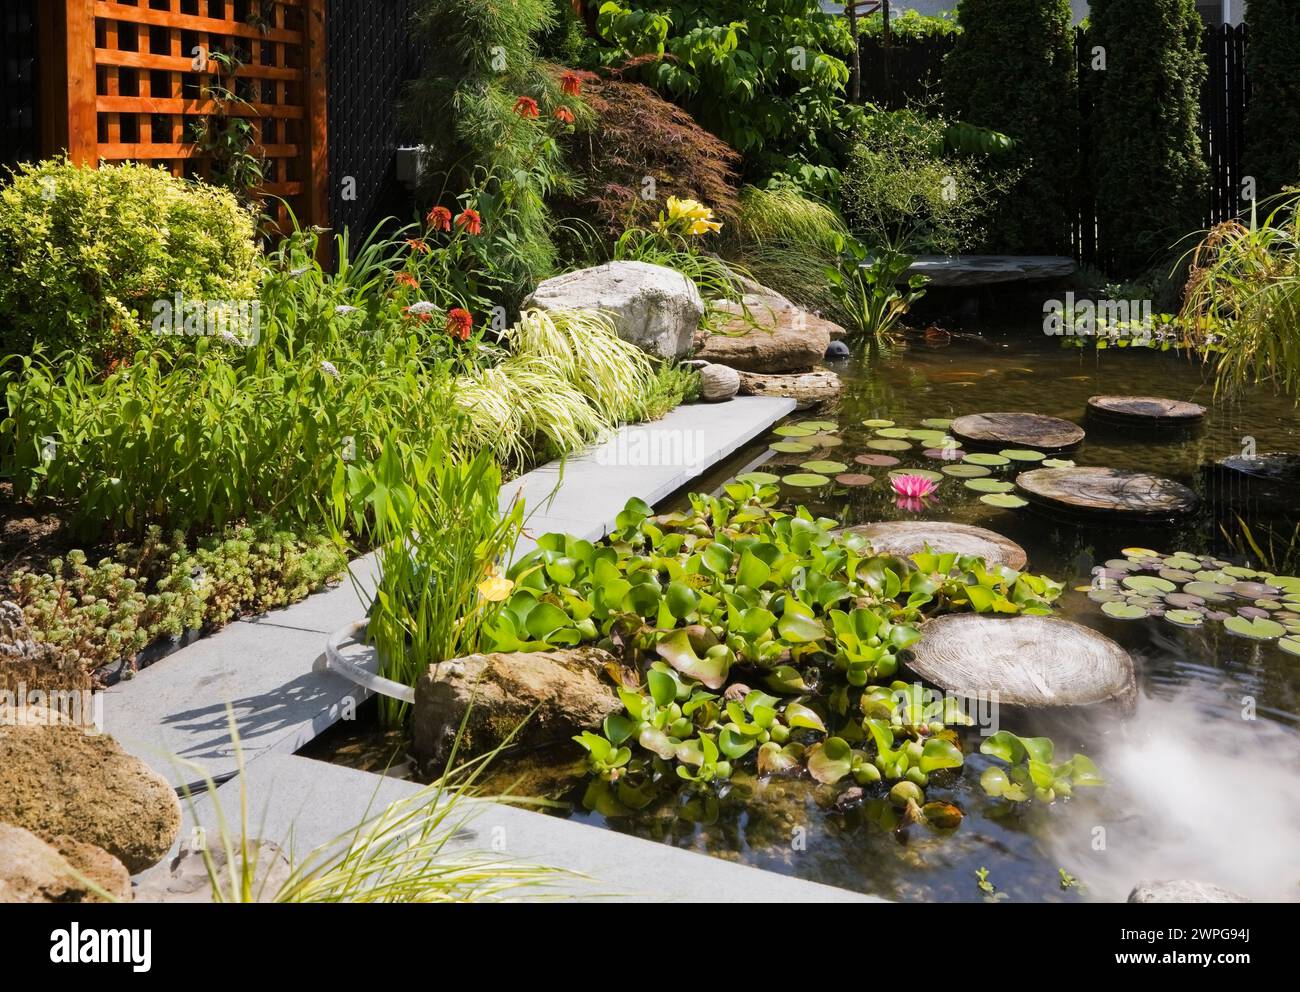 Pond with stepping stones, Eichornia crassipes - Water Hyacinth, pink Nymphaea - Water Lily, red Echinacea 'Hot papaya' - Coneflowers. Stock Photo